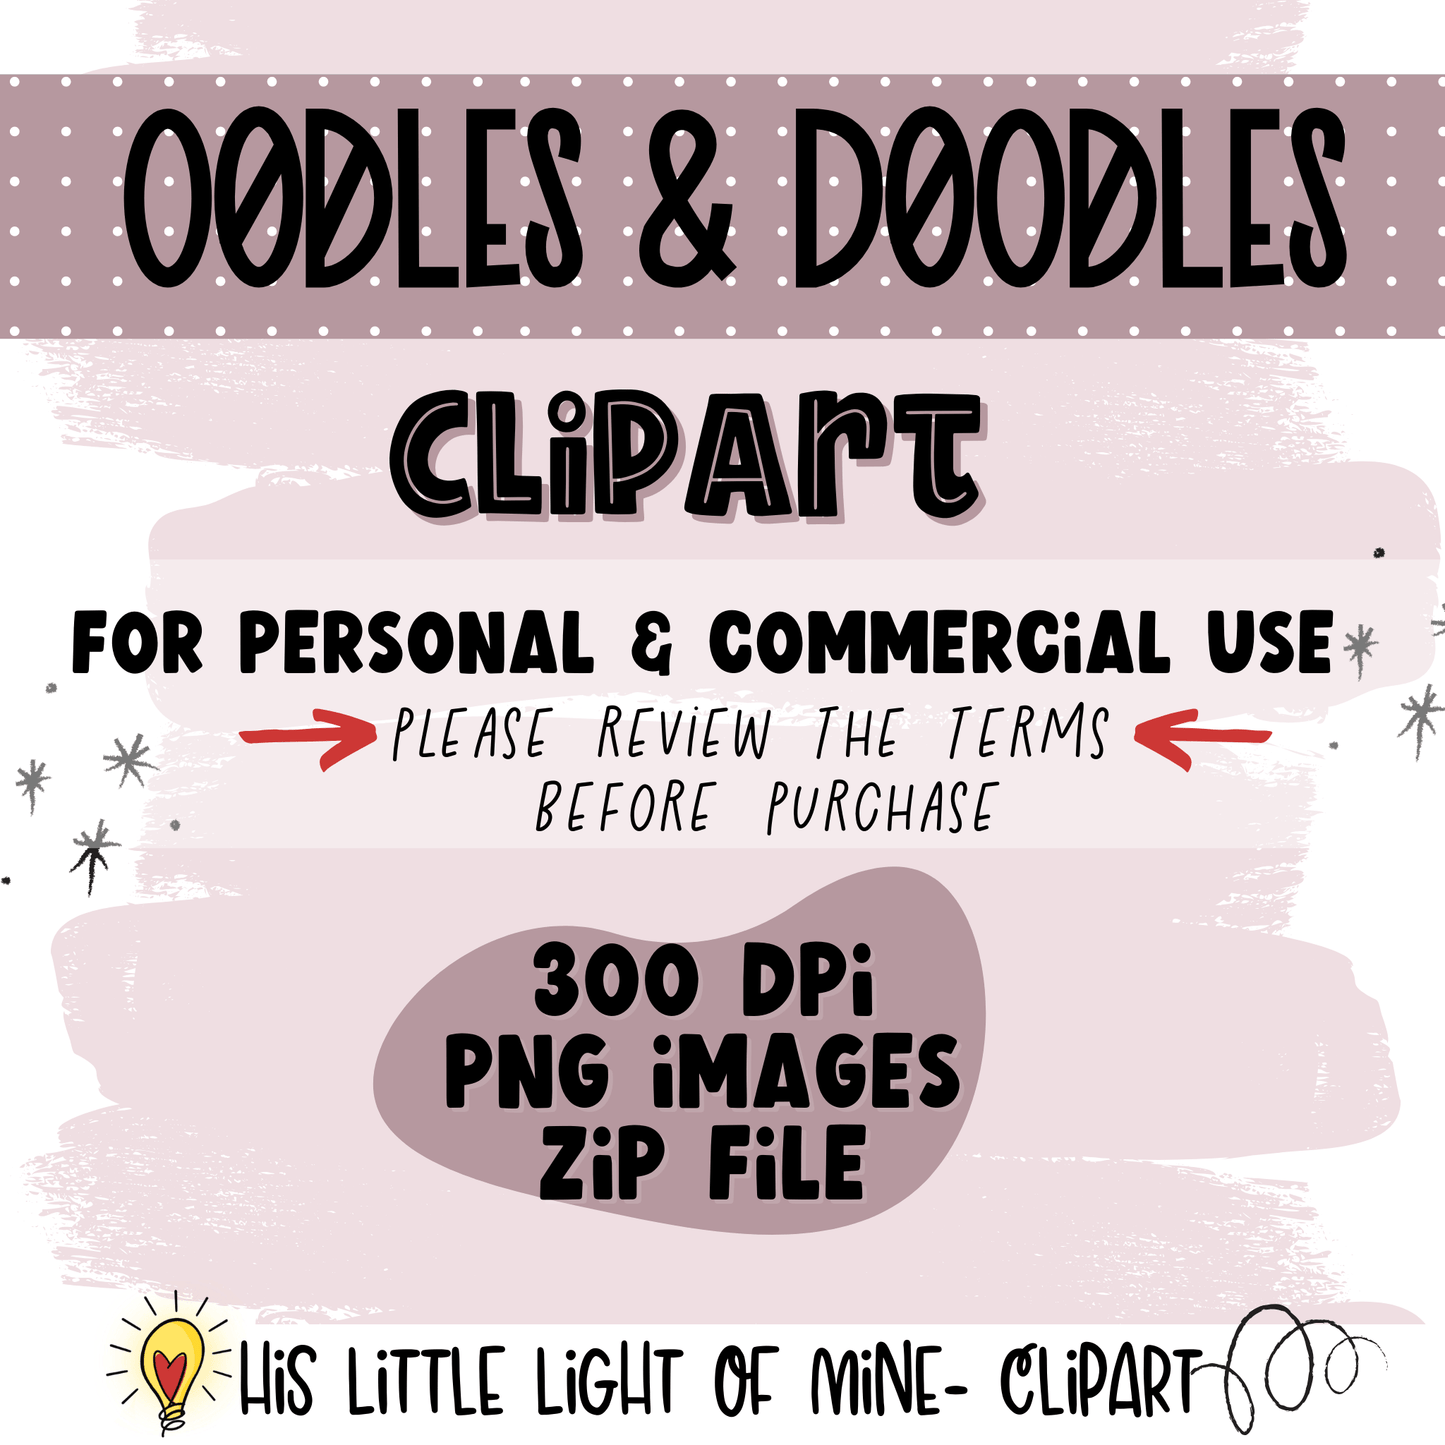 Oodles & Doodles Clip Art Set #2 clip art pack features both personal and commercial use (with terms) and the types and sizes of the files. 